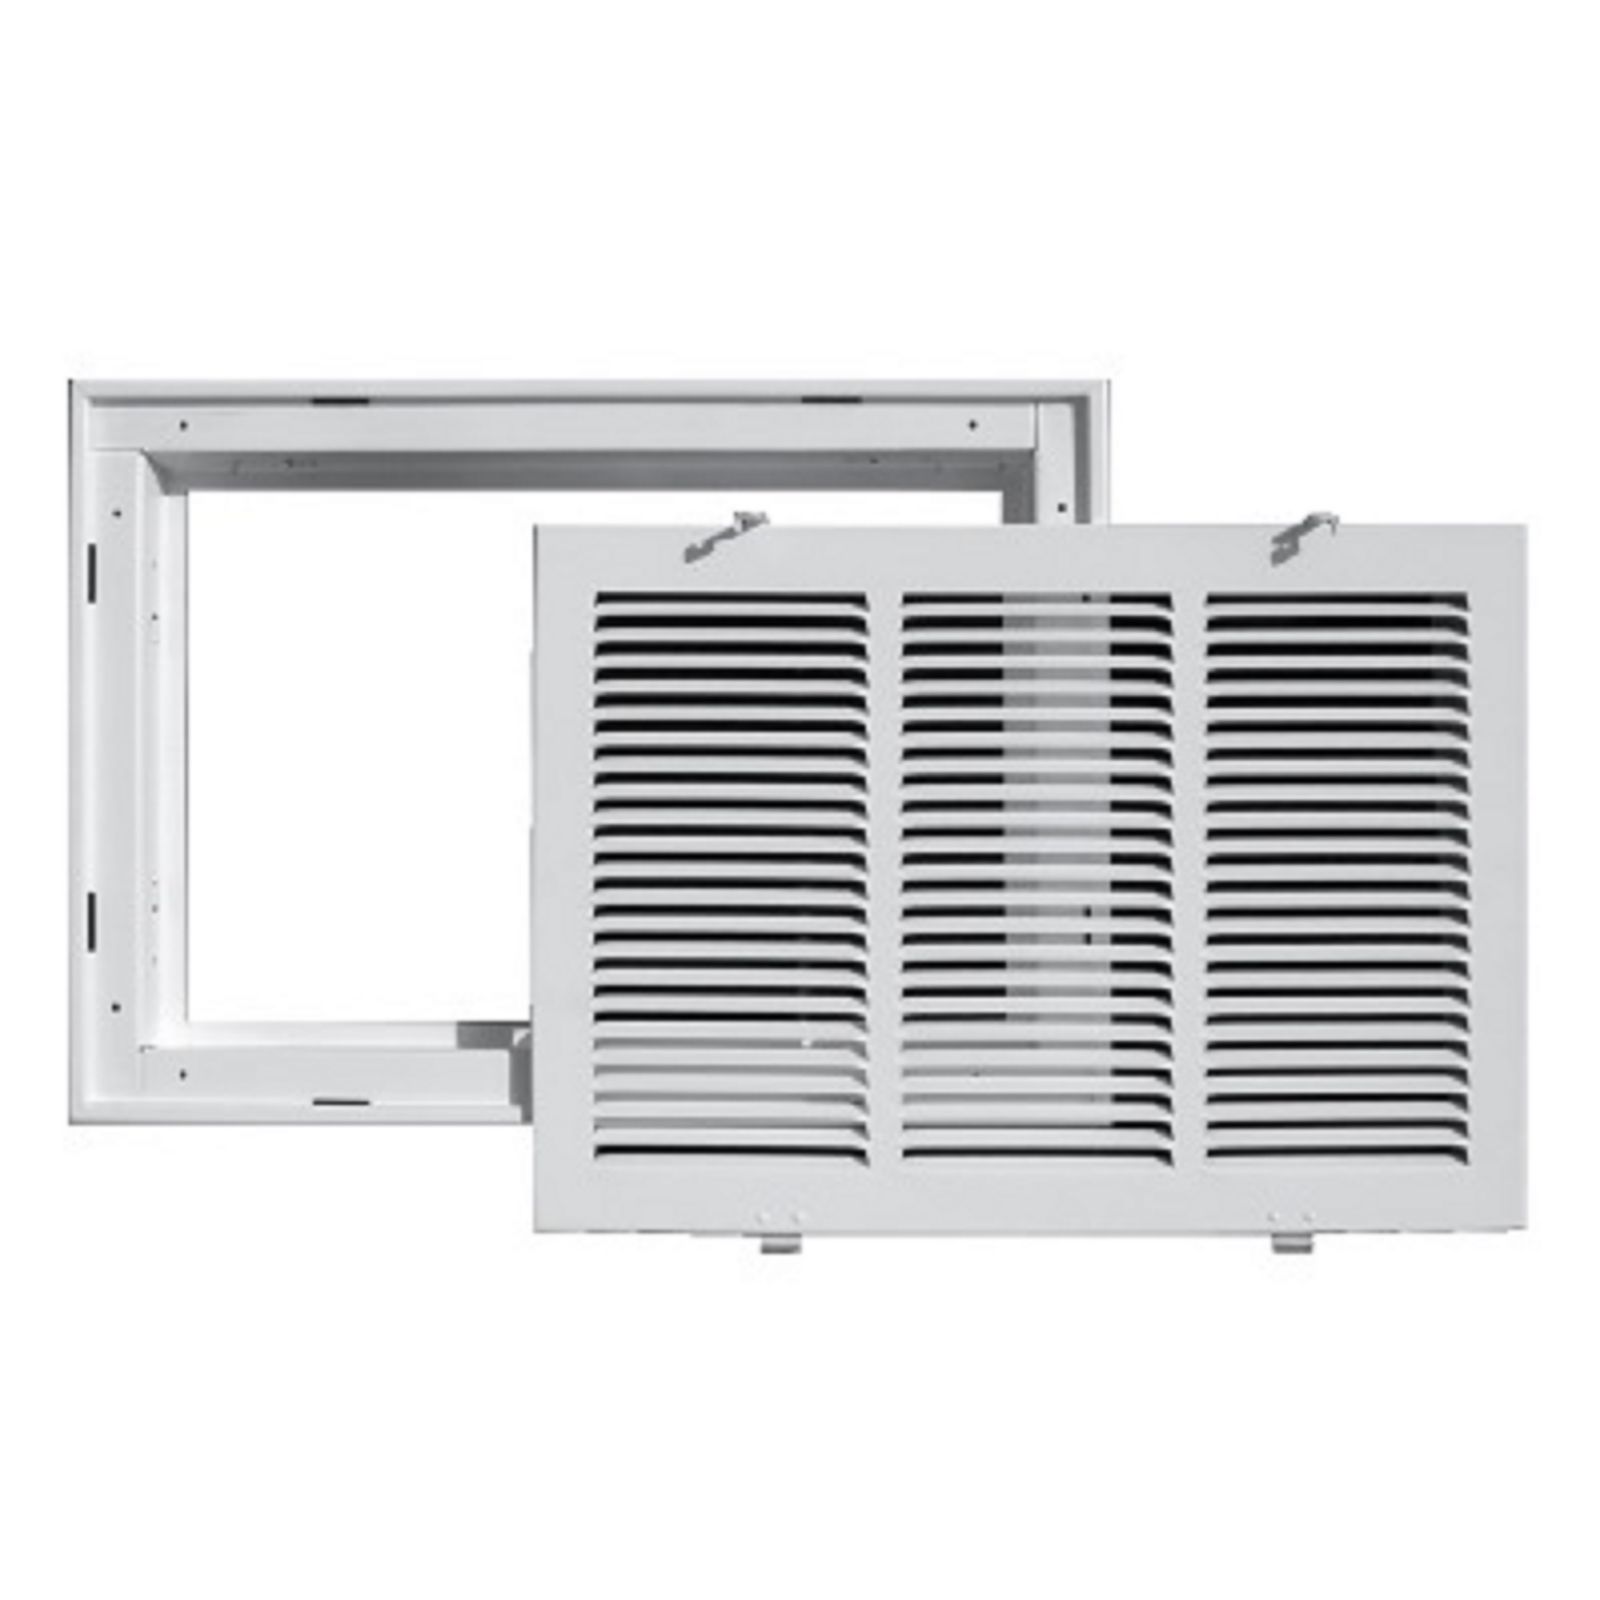 TRUaire 190RF 25X20 - Steel Return Air Filter Grille With Removable Face, White, 25" X 20"